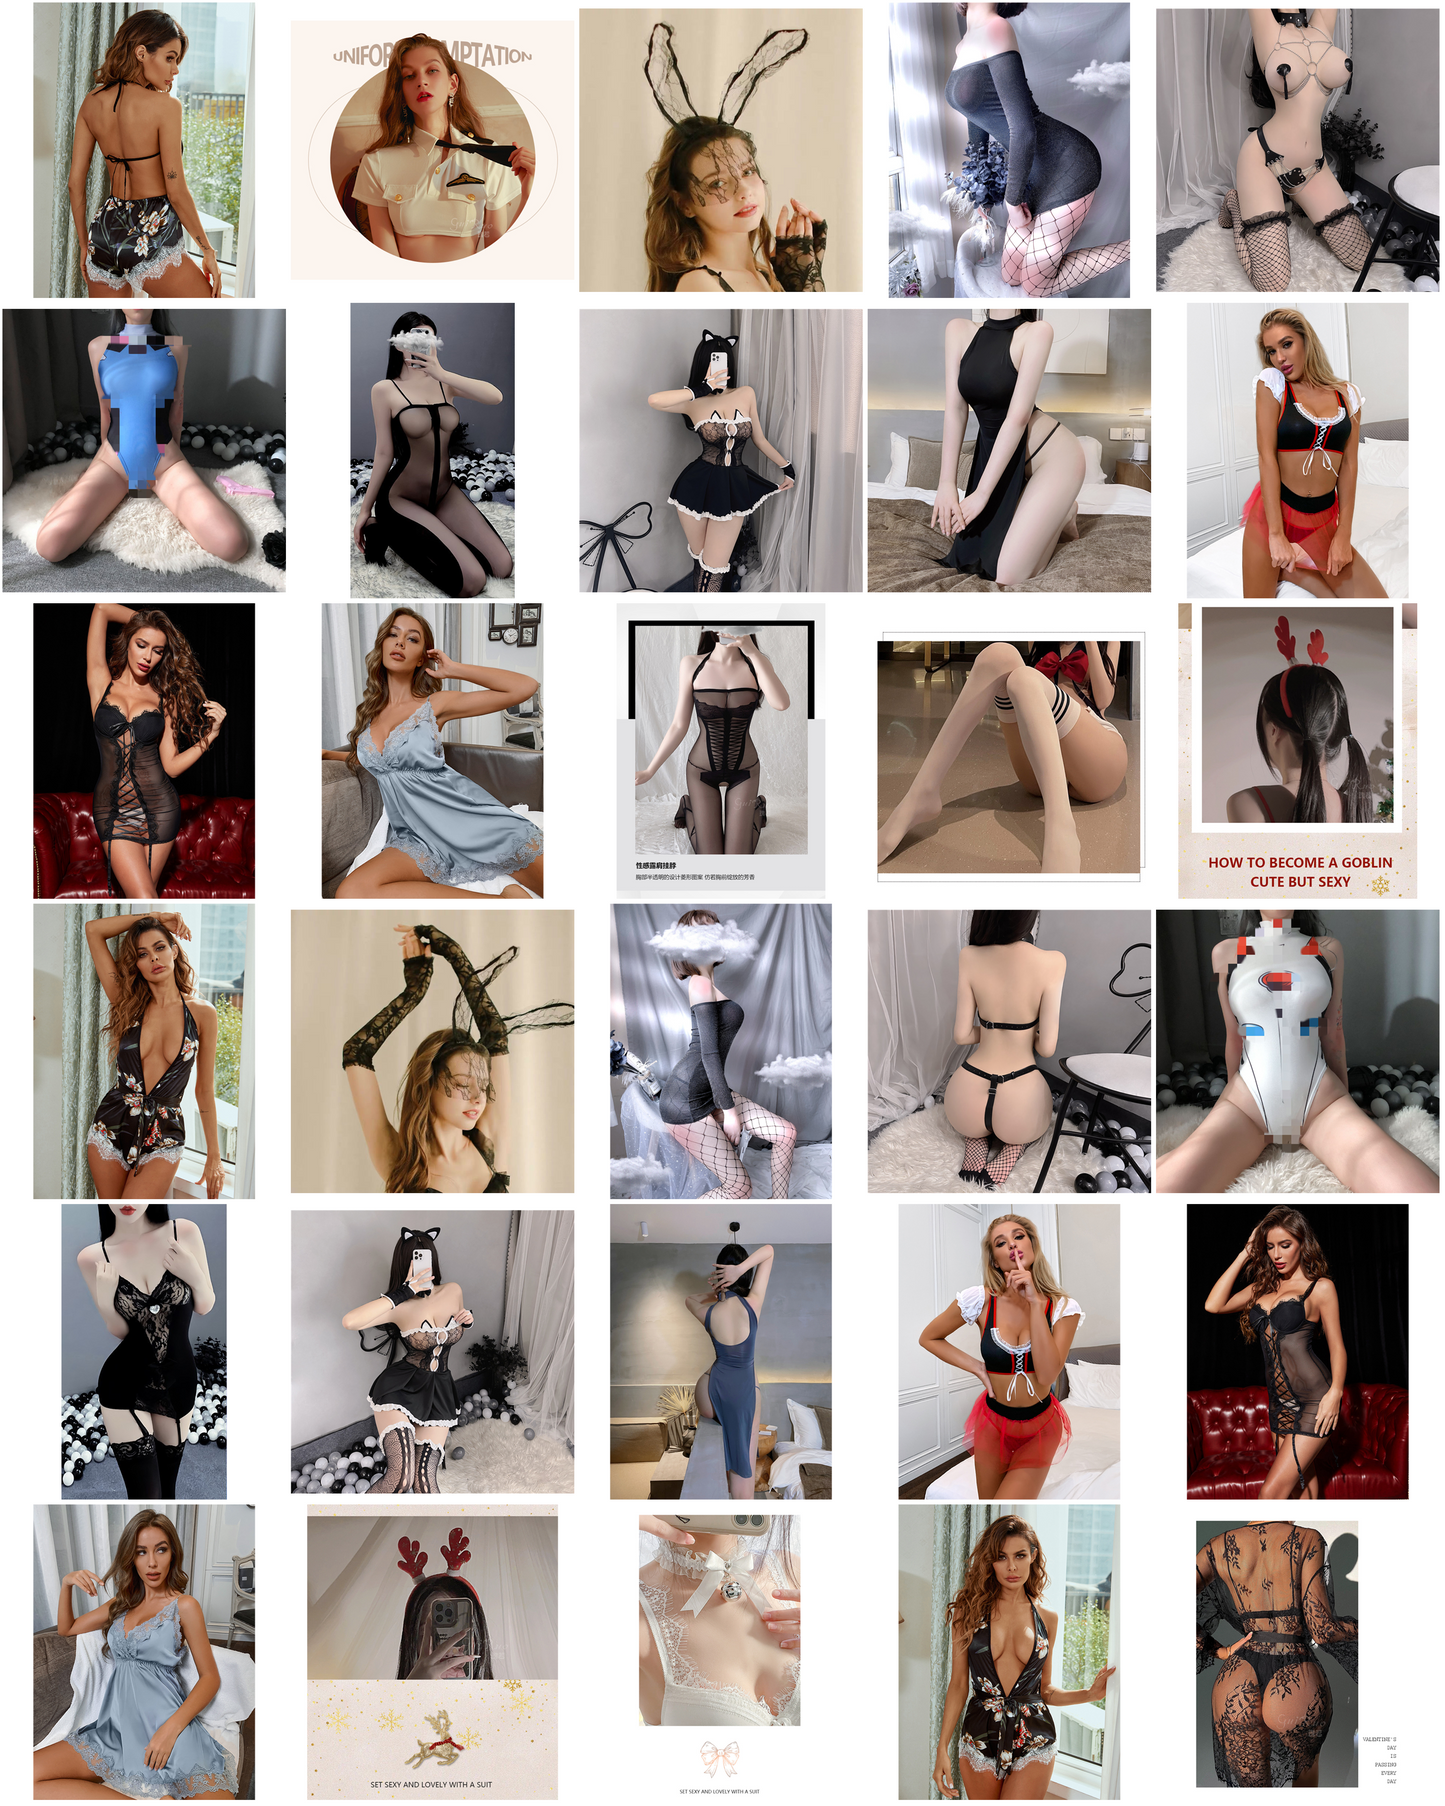 Up to 95% Off ! $2.00 Each ! Sexy lingerie blind box for 15/20/36 pieces!